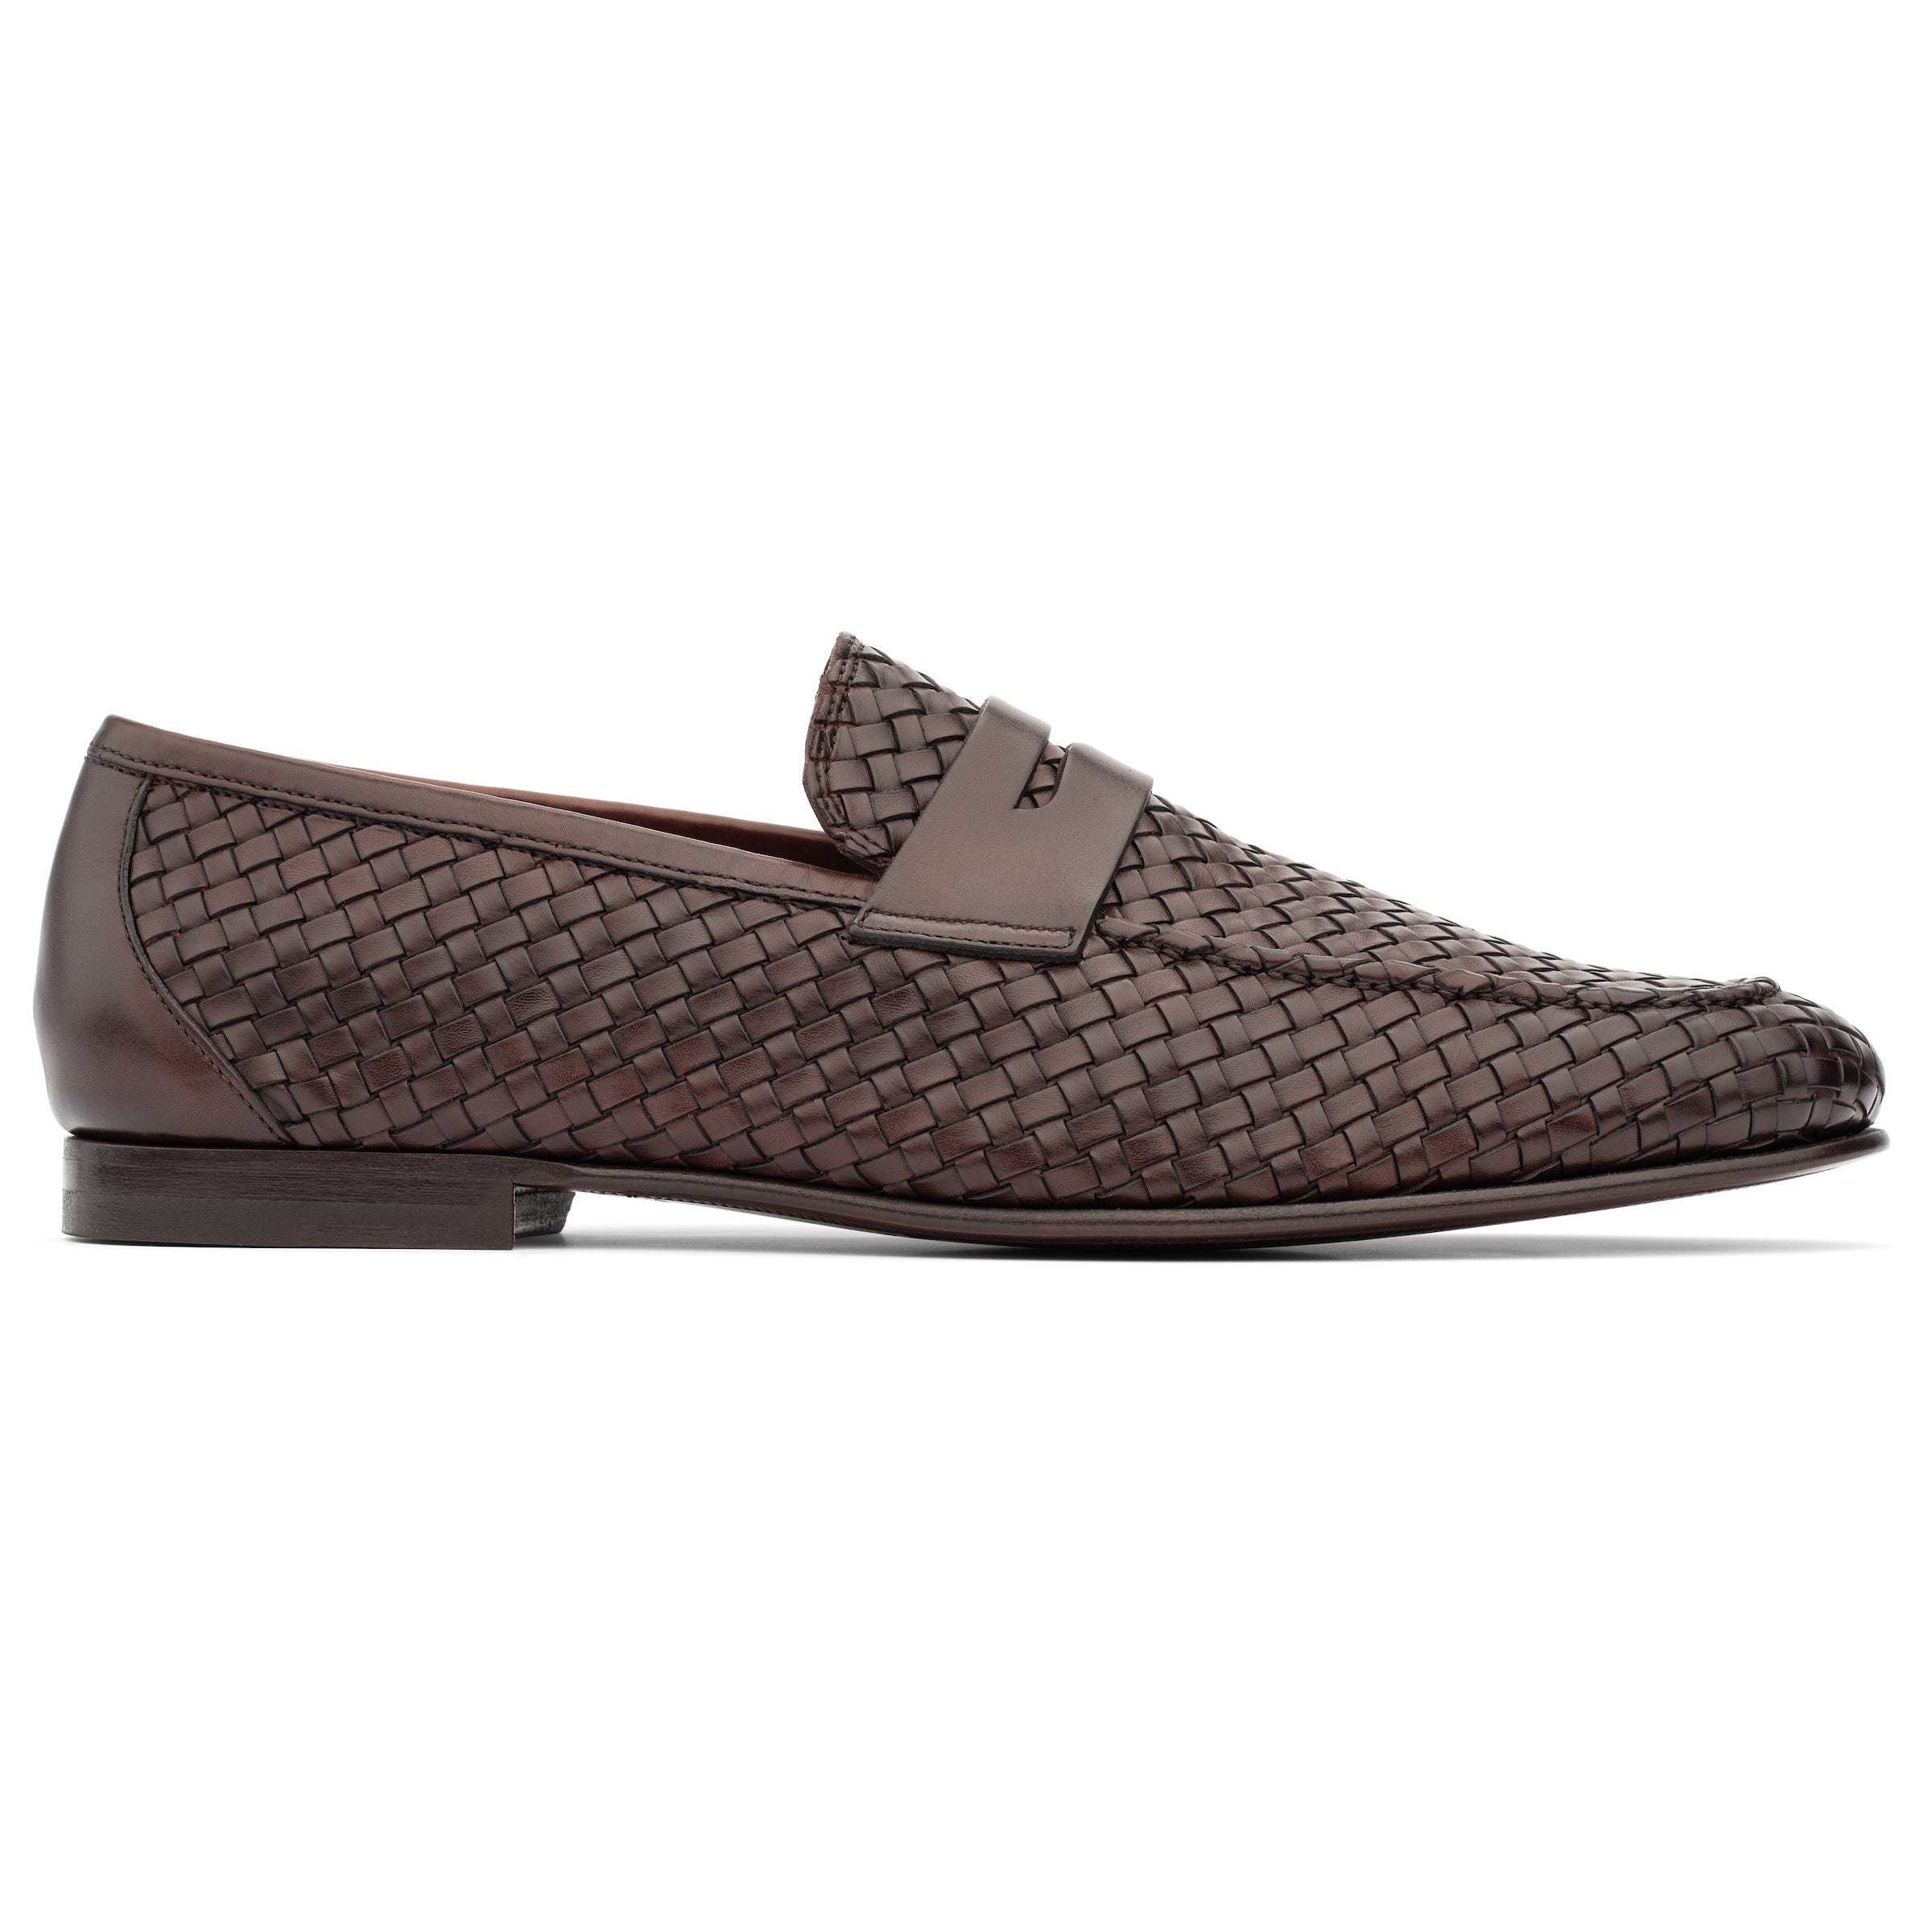 Zenith Brown Woven Leather Loafer